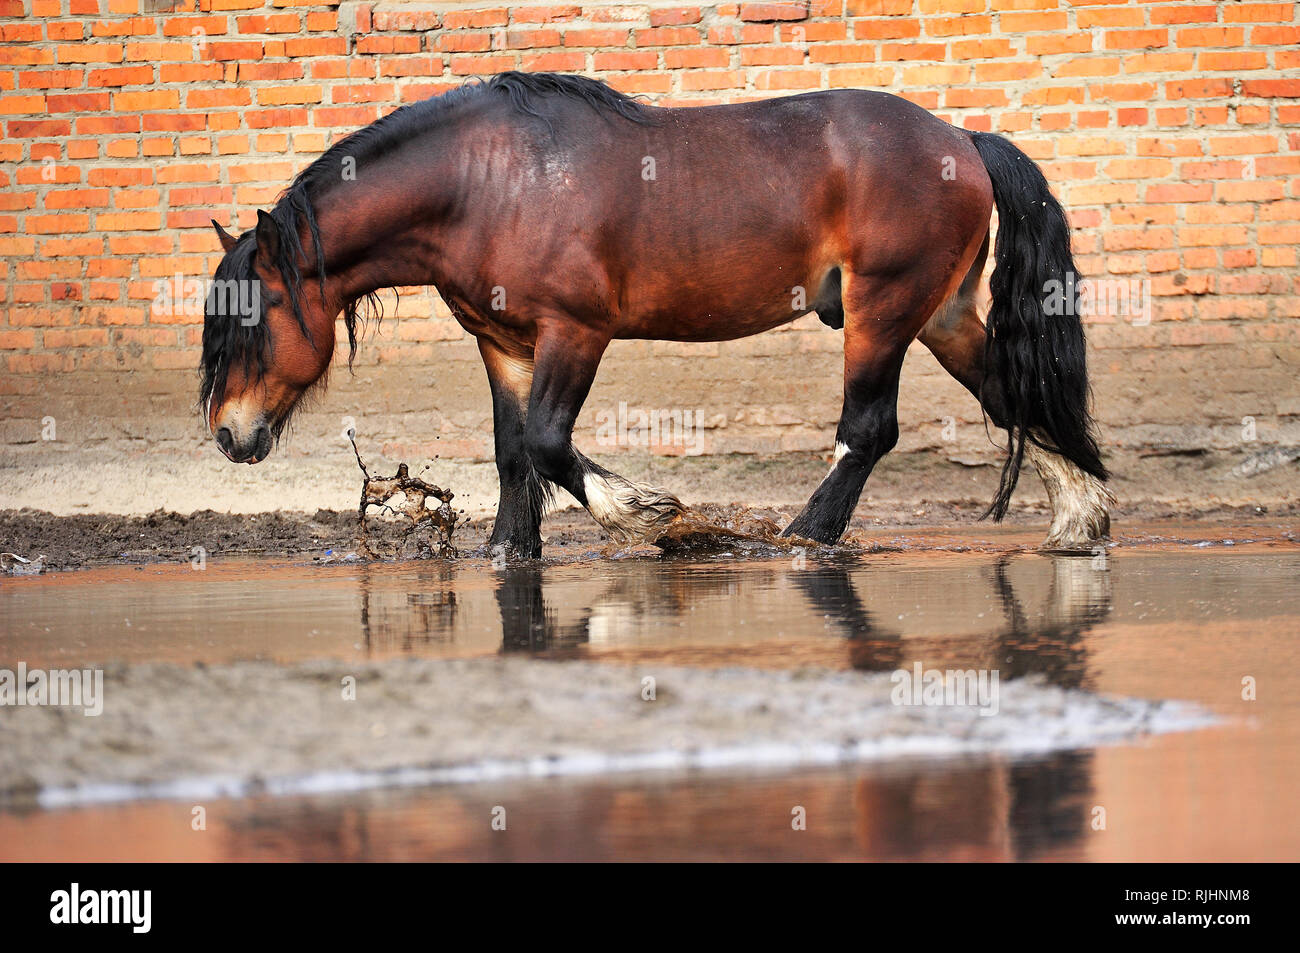 Bay draft horse calmly walks along red brick wall in a muddy puddle making splashes. Horizontal, side view, in motion. Stock Photo